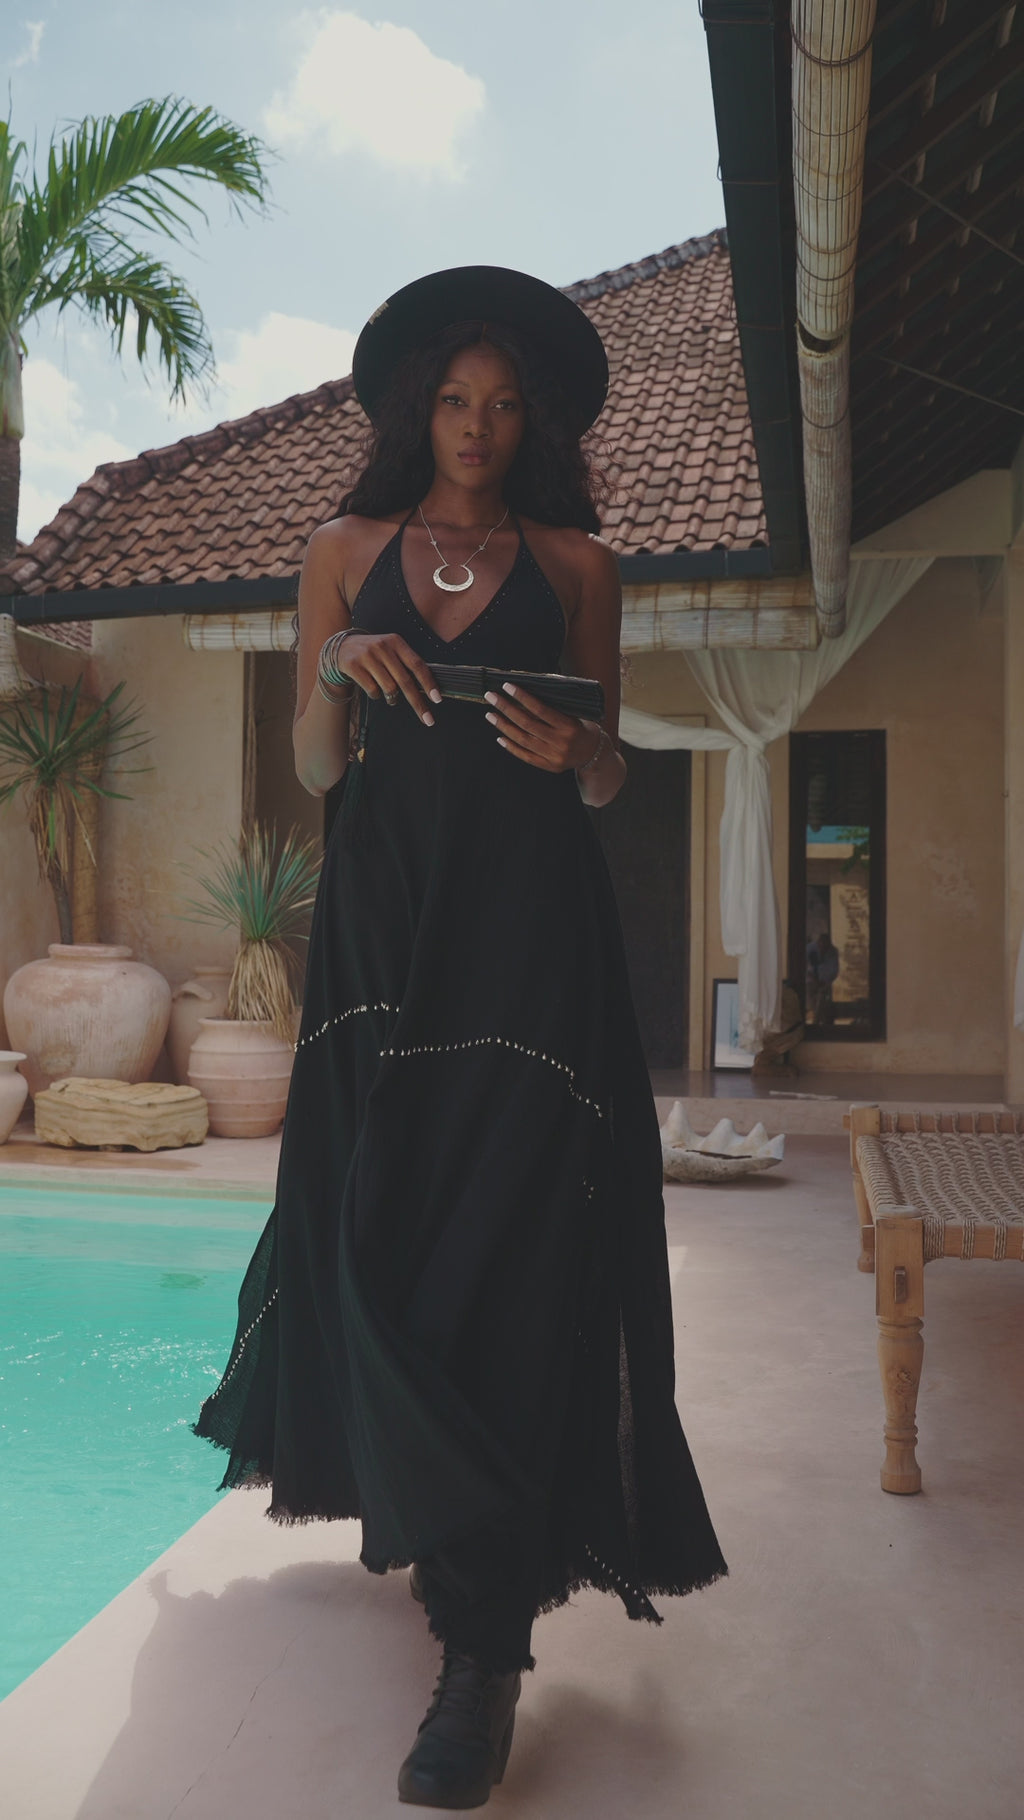 Aya Sacred Wear Black Goddess Dress – Make a bold statement with this unique and stylish garment.